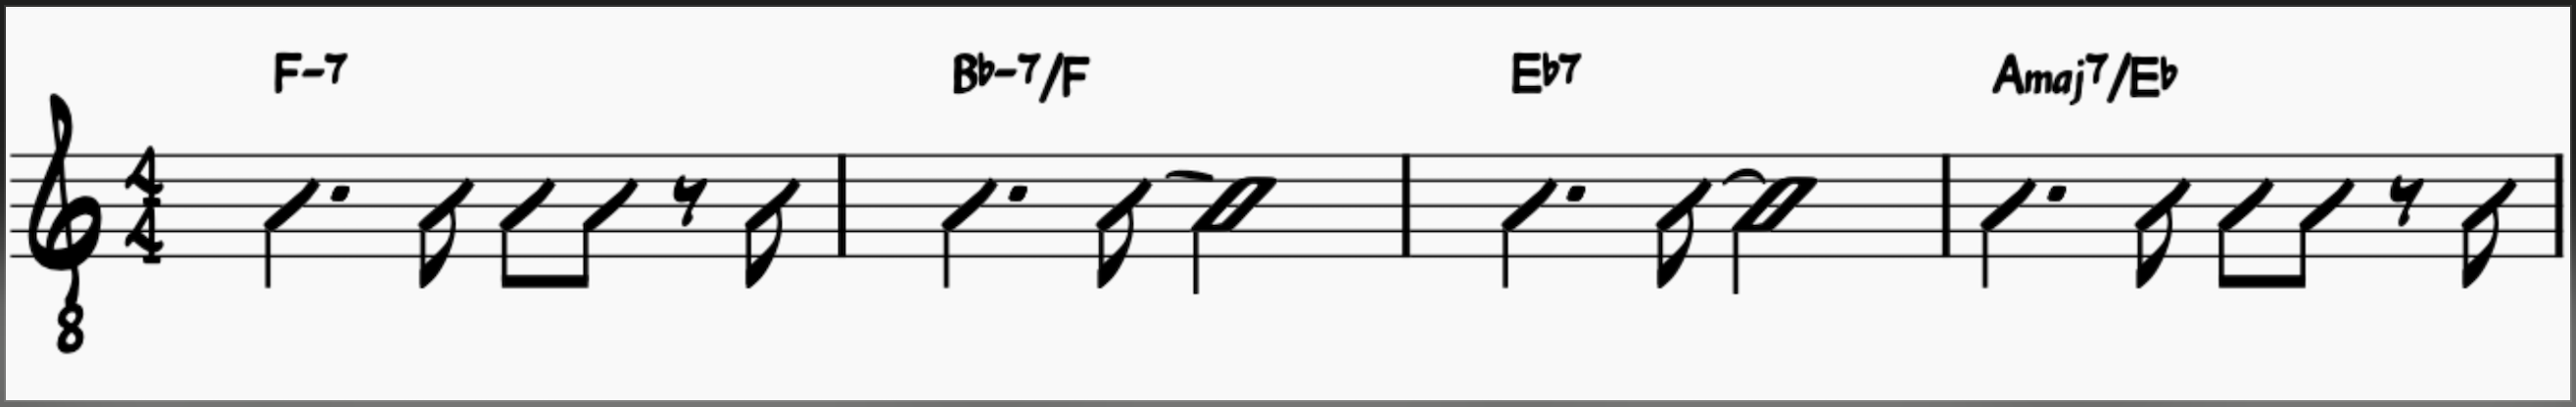 Rhythm Combination Comping Over First 4 Bars of All The Things You Are